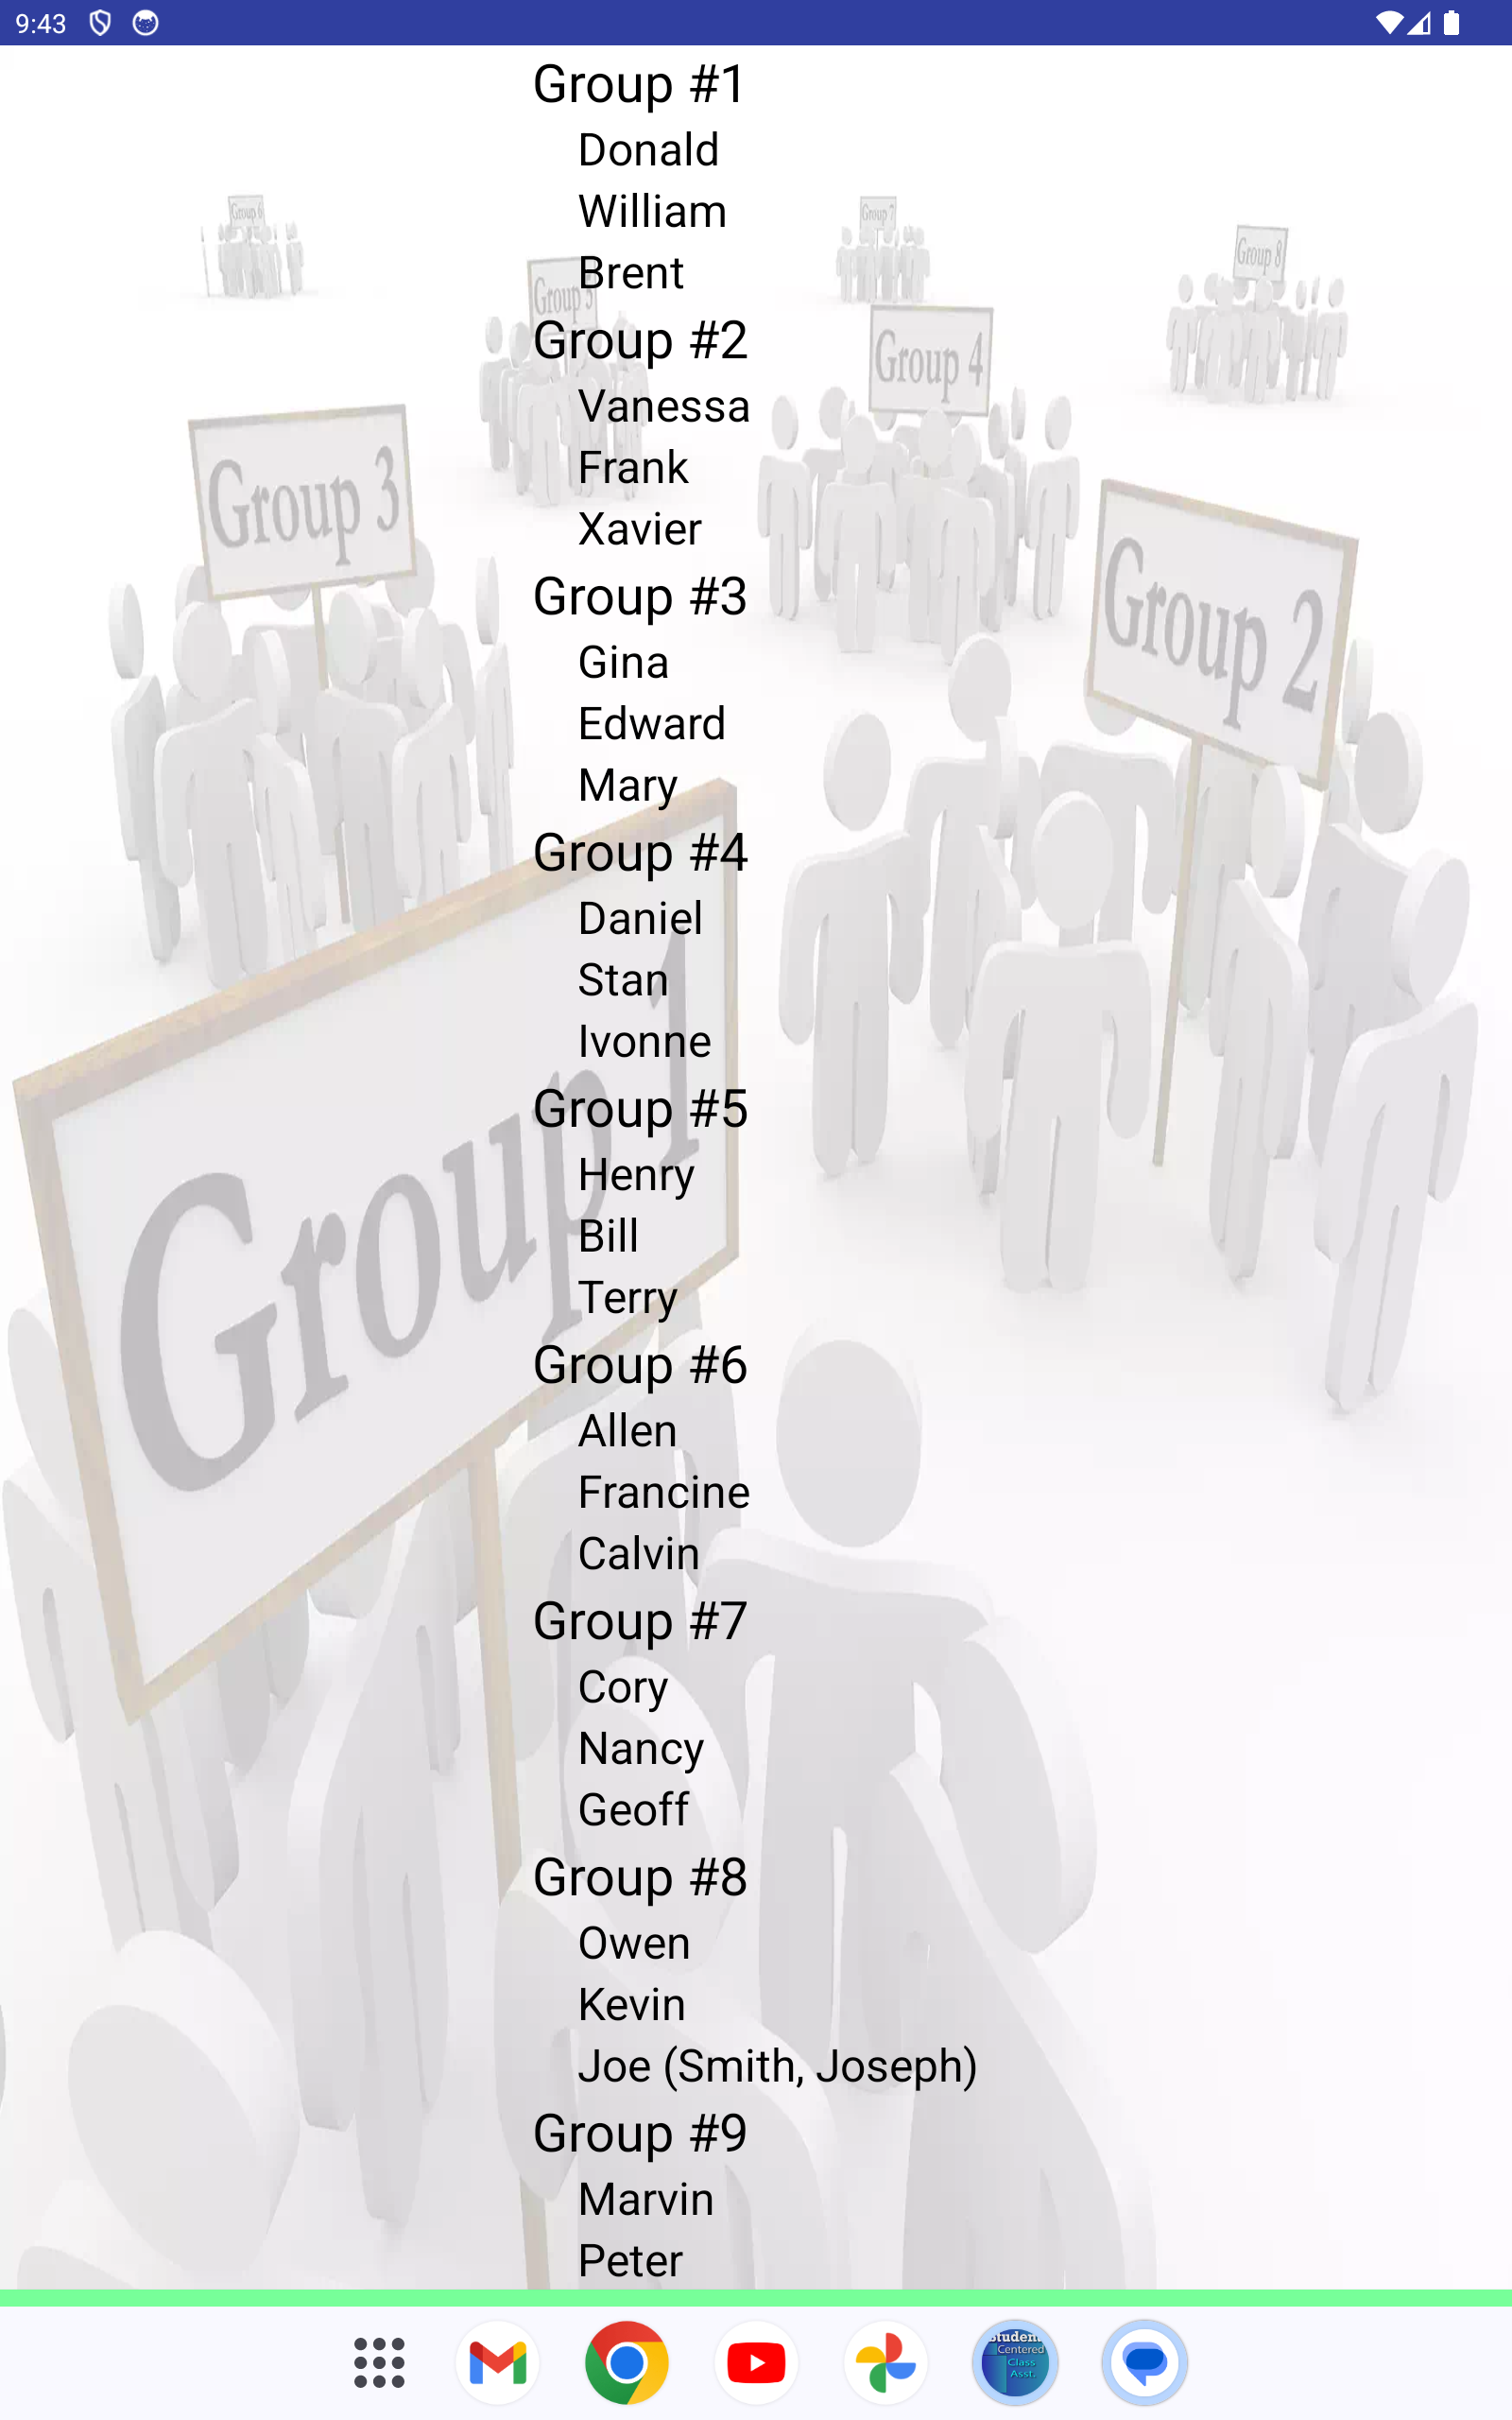 group student list on Android sample